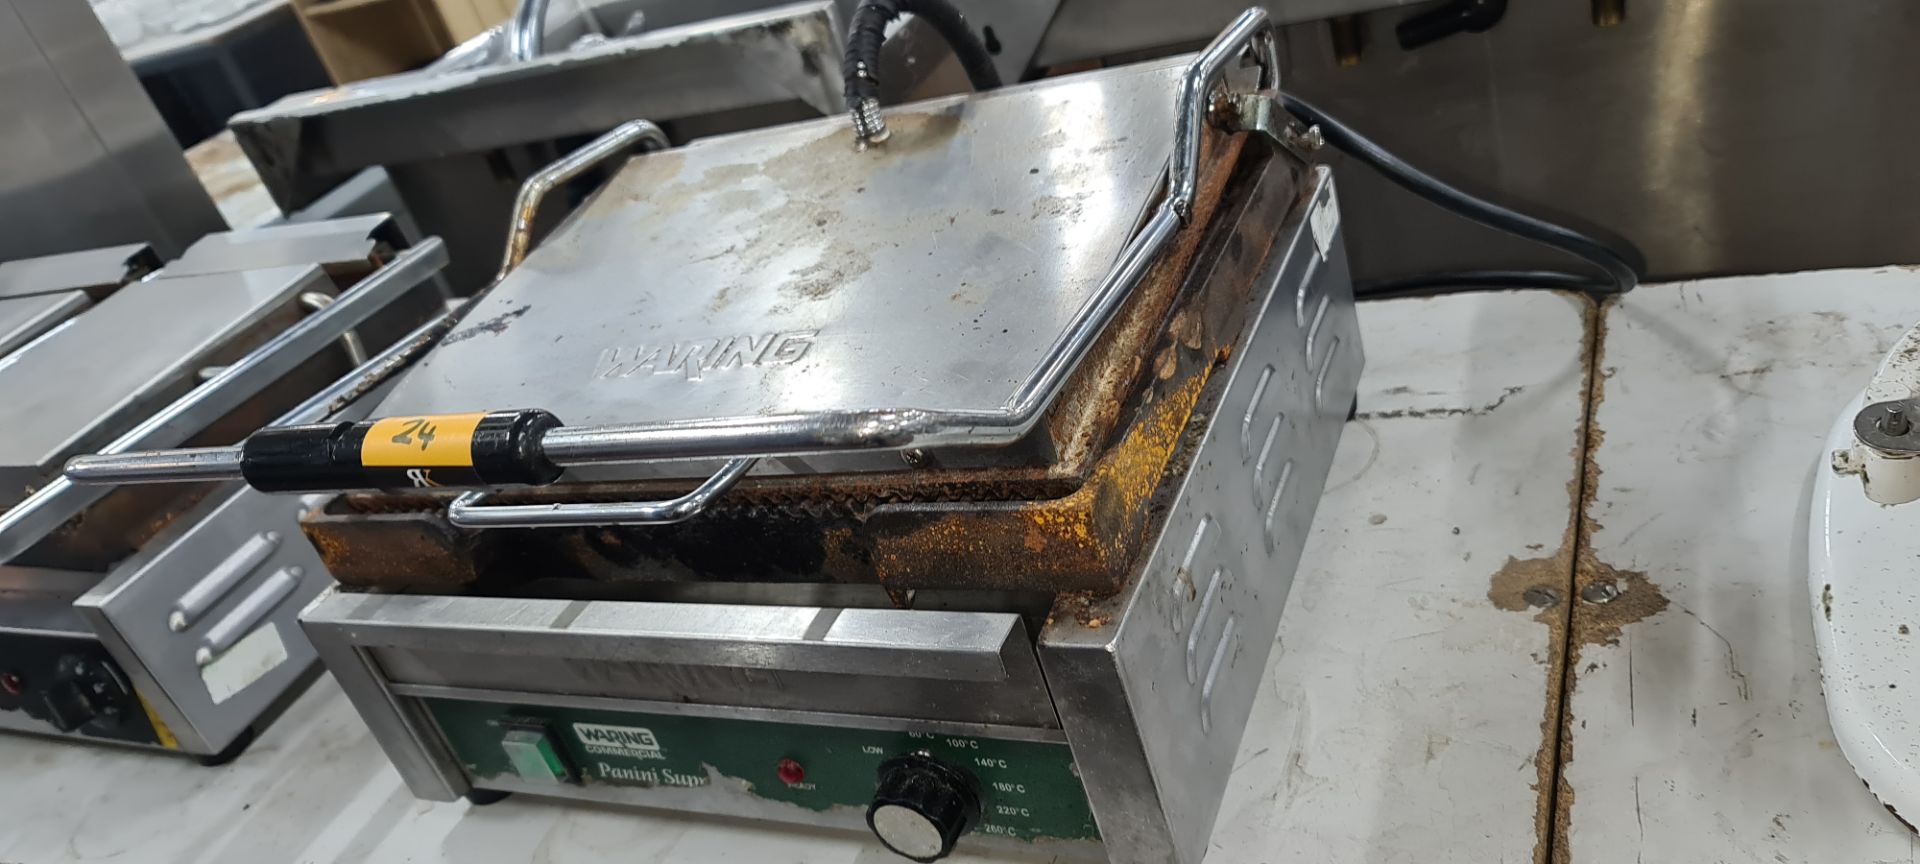 Waring commercial panini maker - Image 3 of 7